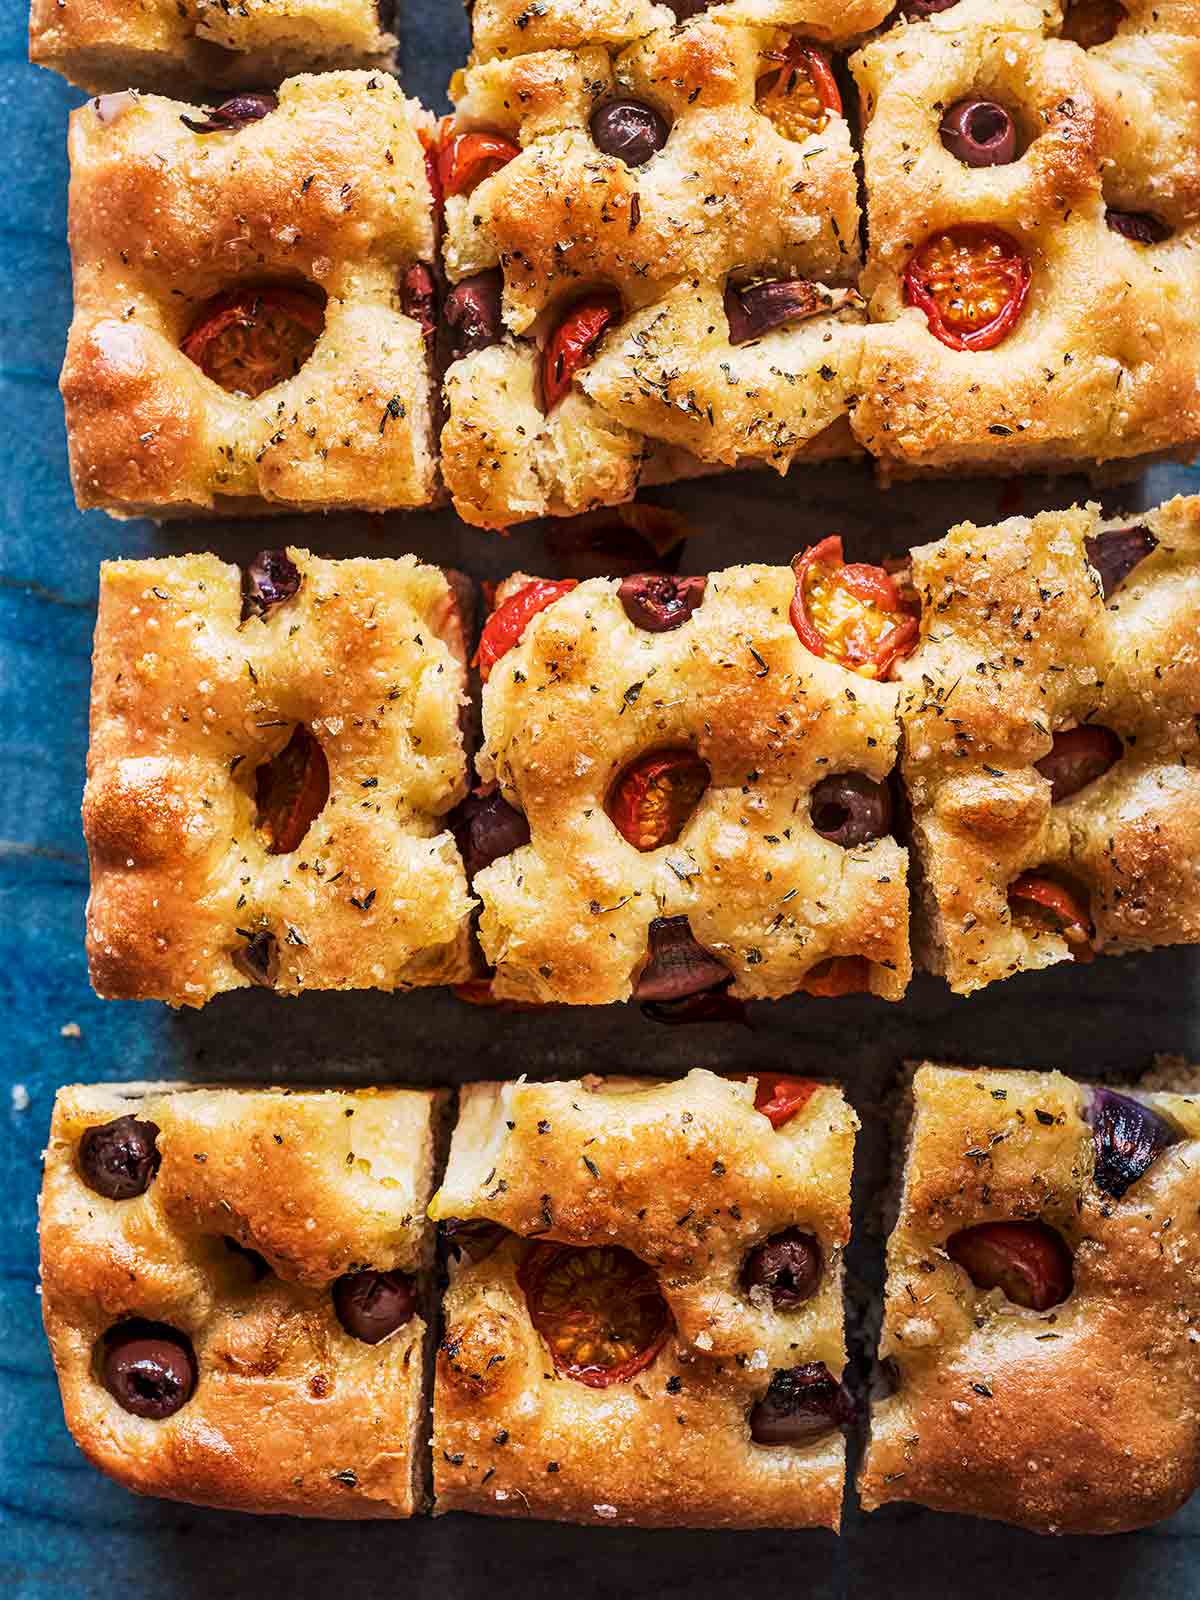 A tomato, olive, and onion focaccia from Paul Hollywood.